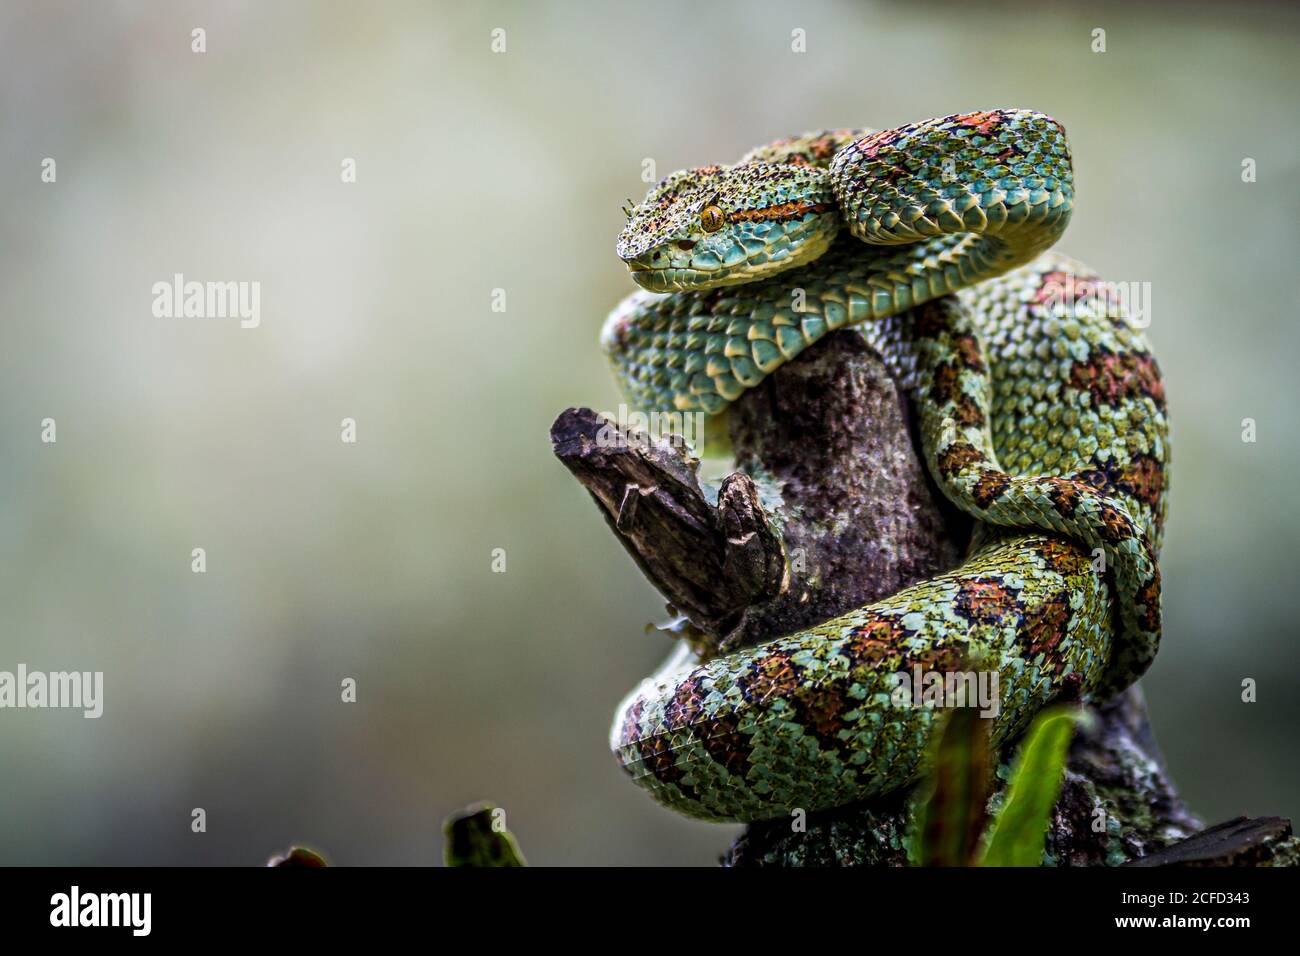 Bothriechis supraciliaris, Blotched palm-pit viper, venomous green arboreal snake. Coiled on the dry branch of a tree in a defensive position. Stock Photo